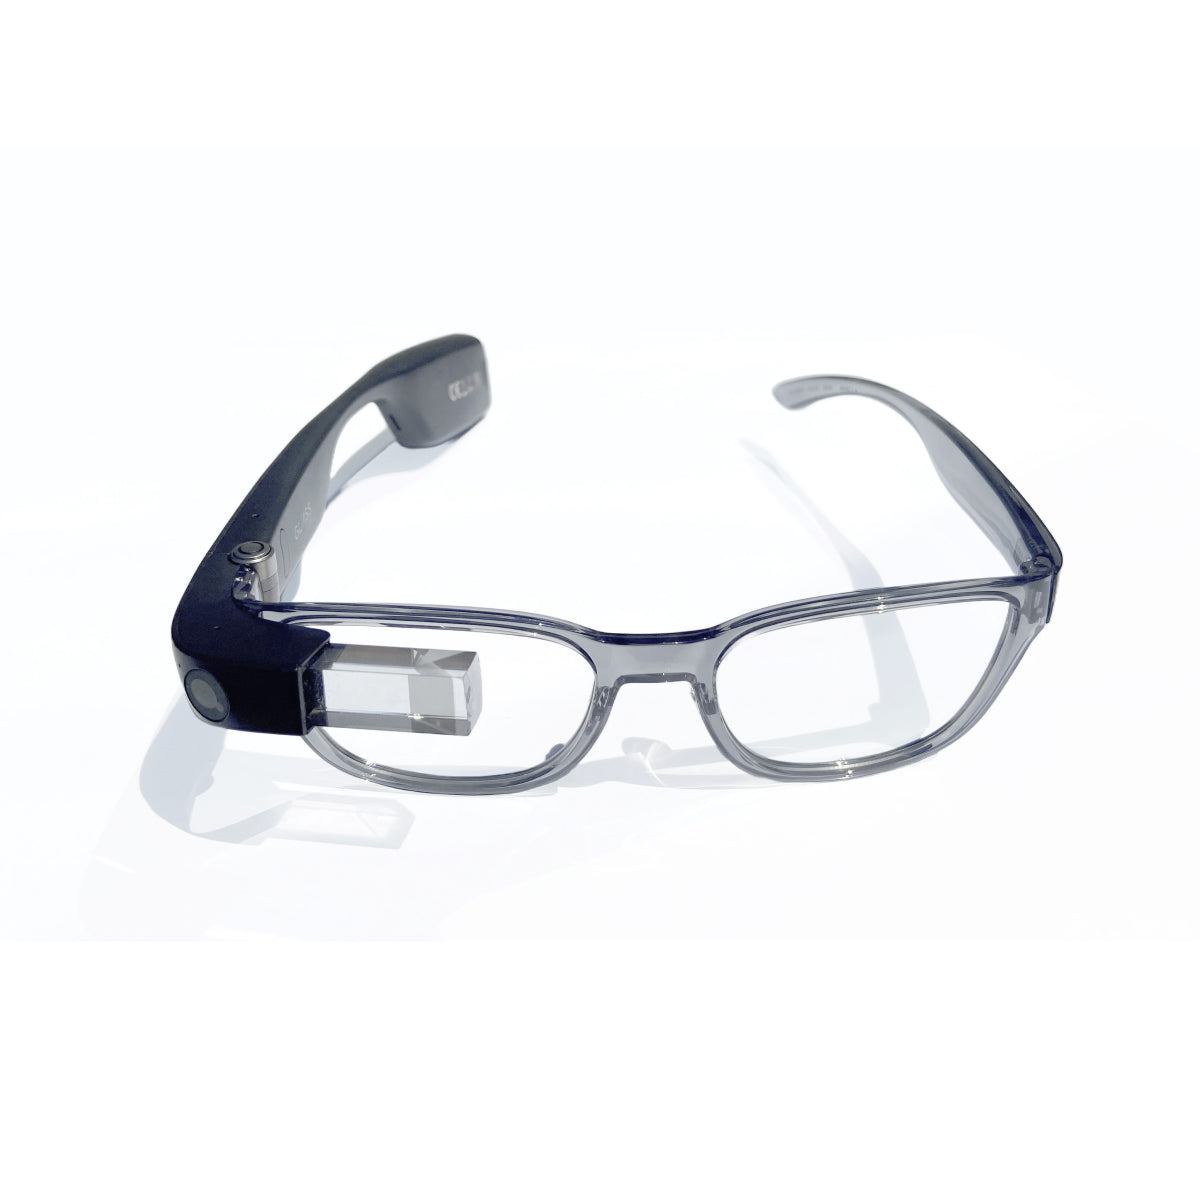 Transparent grey frames attached to the Envision Glasses - Front view